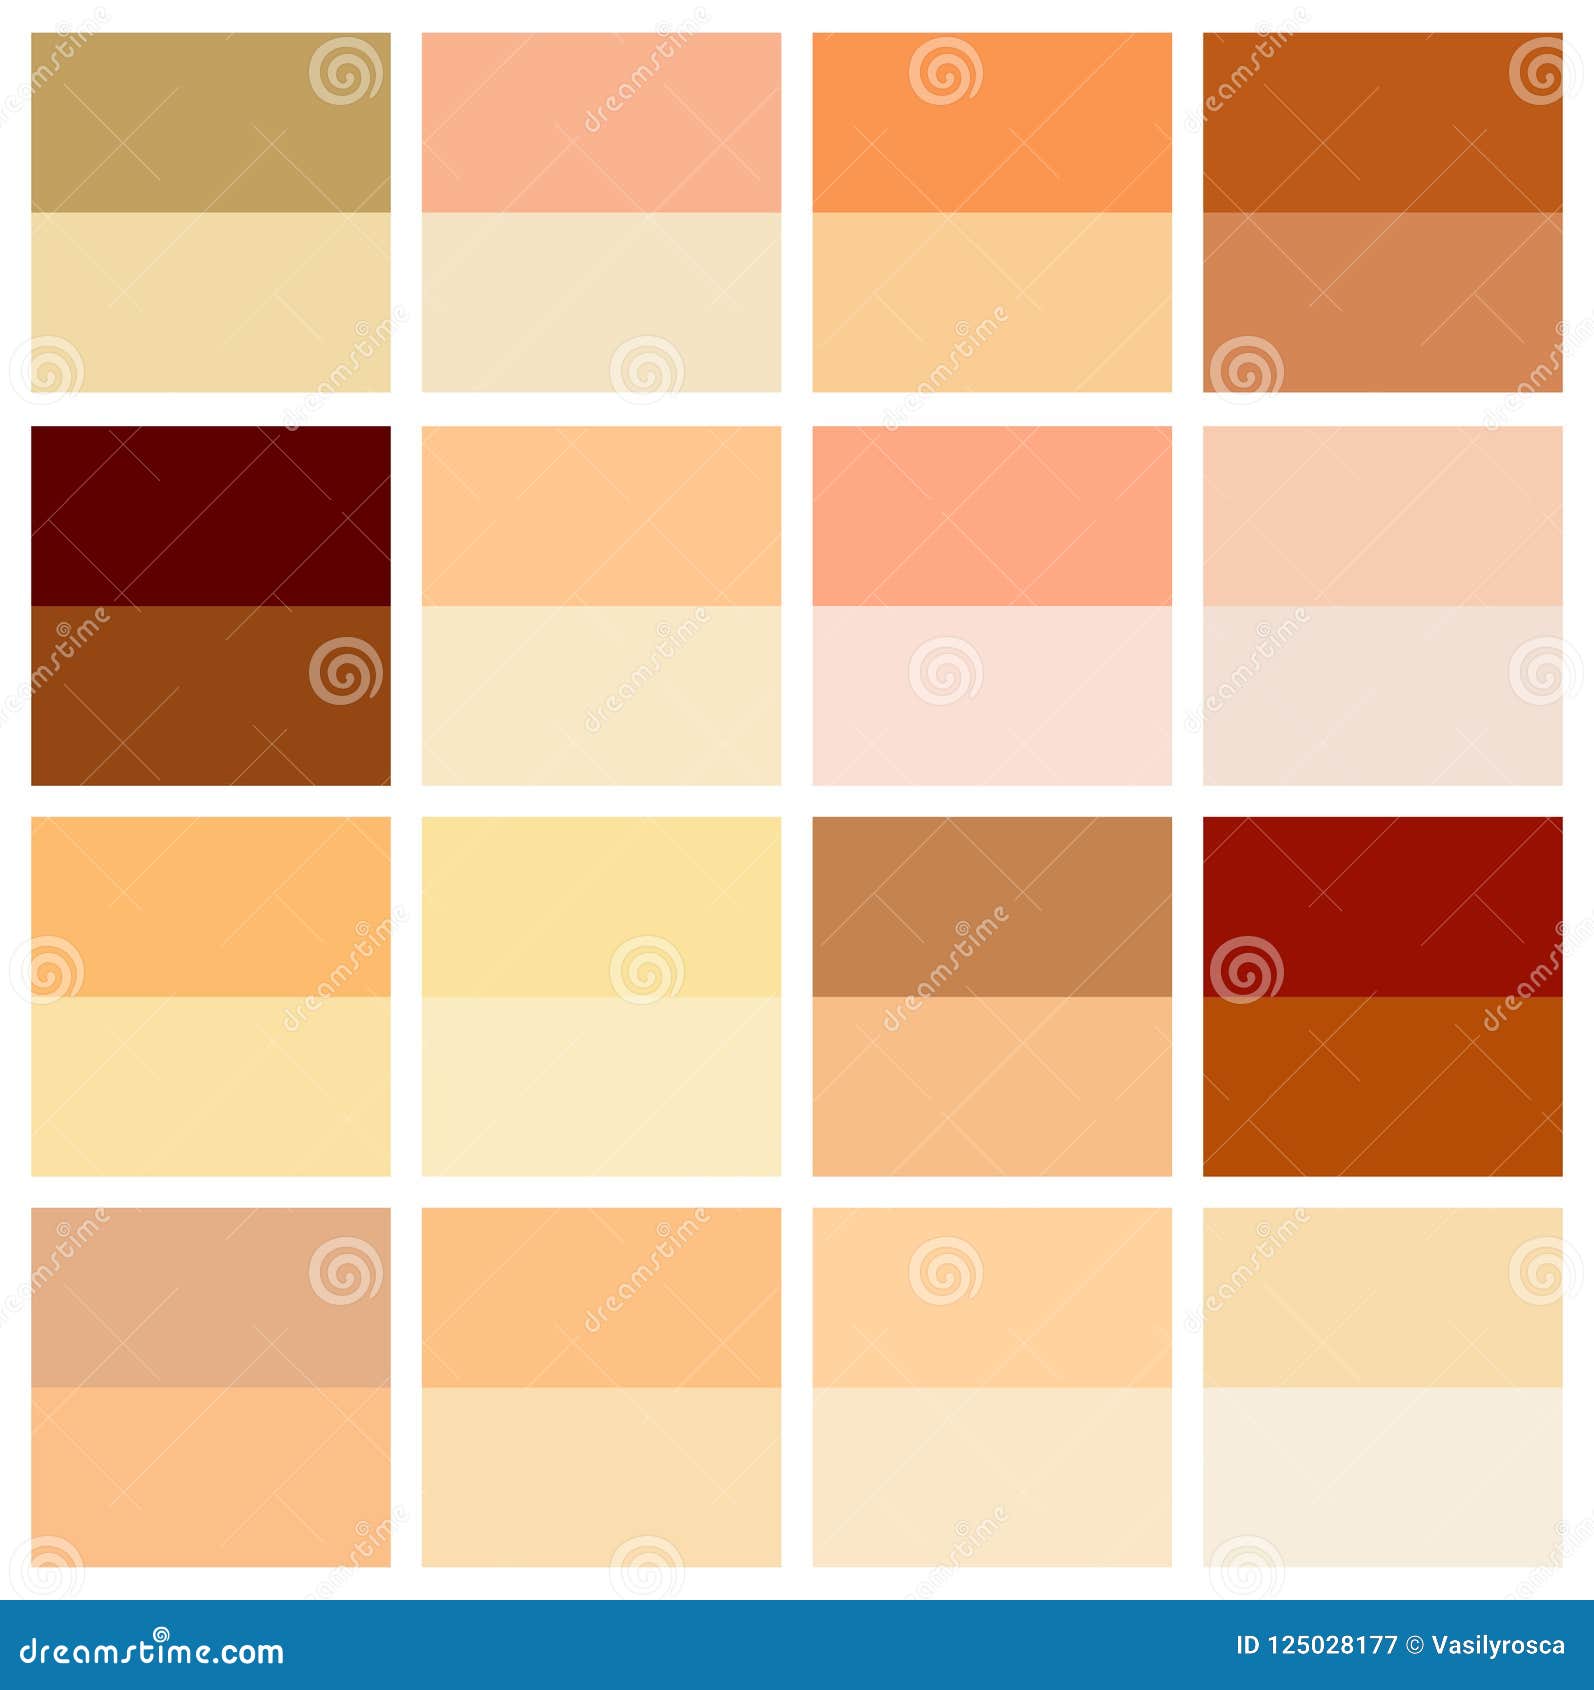 Skin Tone Color Chart. Human Skin Texture Color Infographic Palette ...